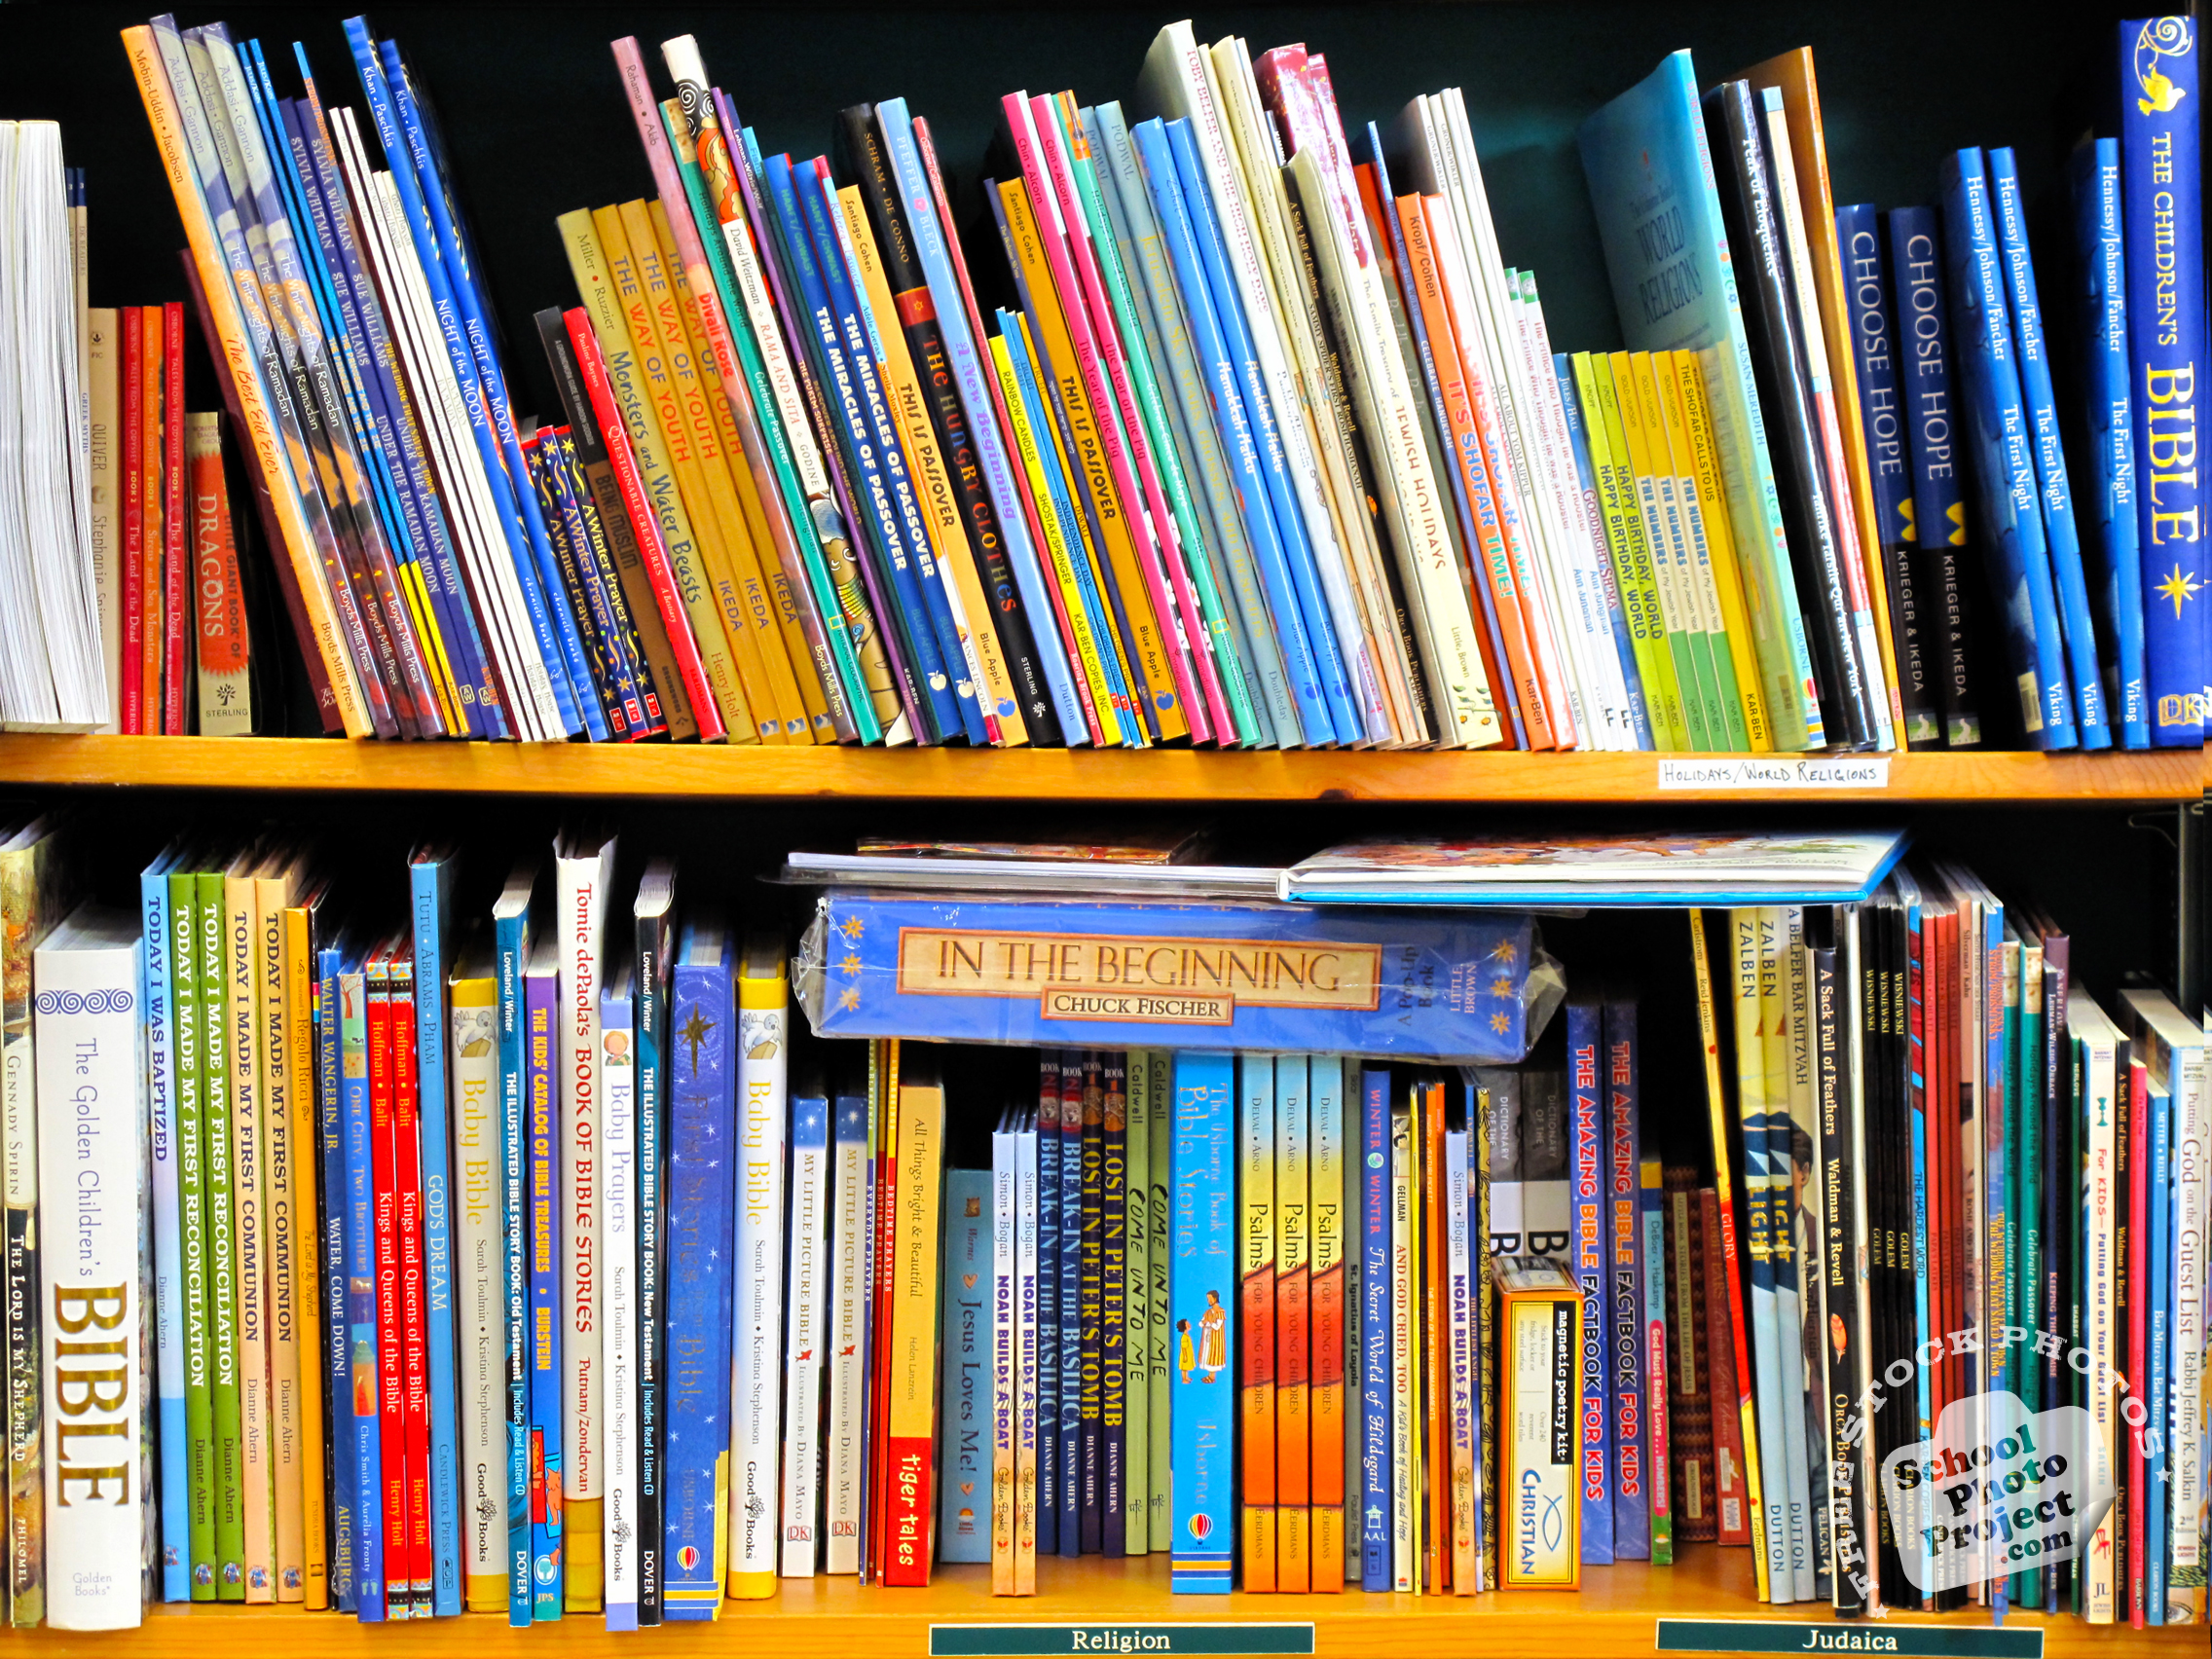 Books, FREE Stock Photo, Image, Picture: Books in Bookcase, Royalty